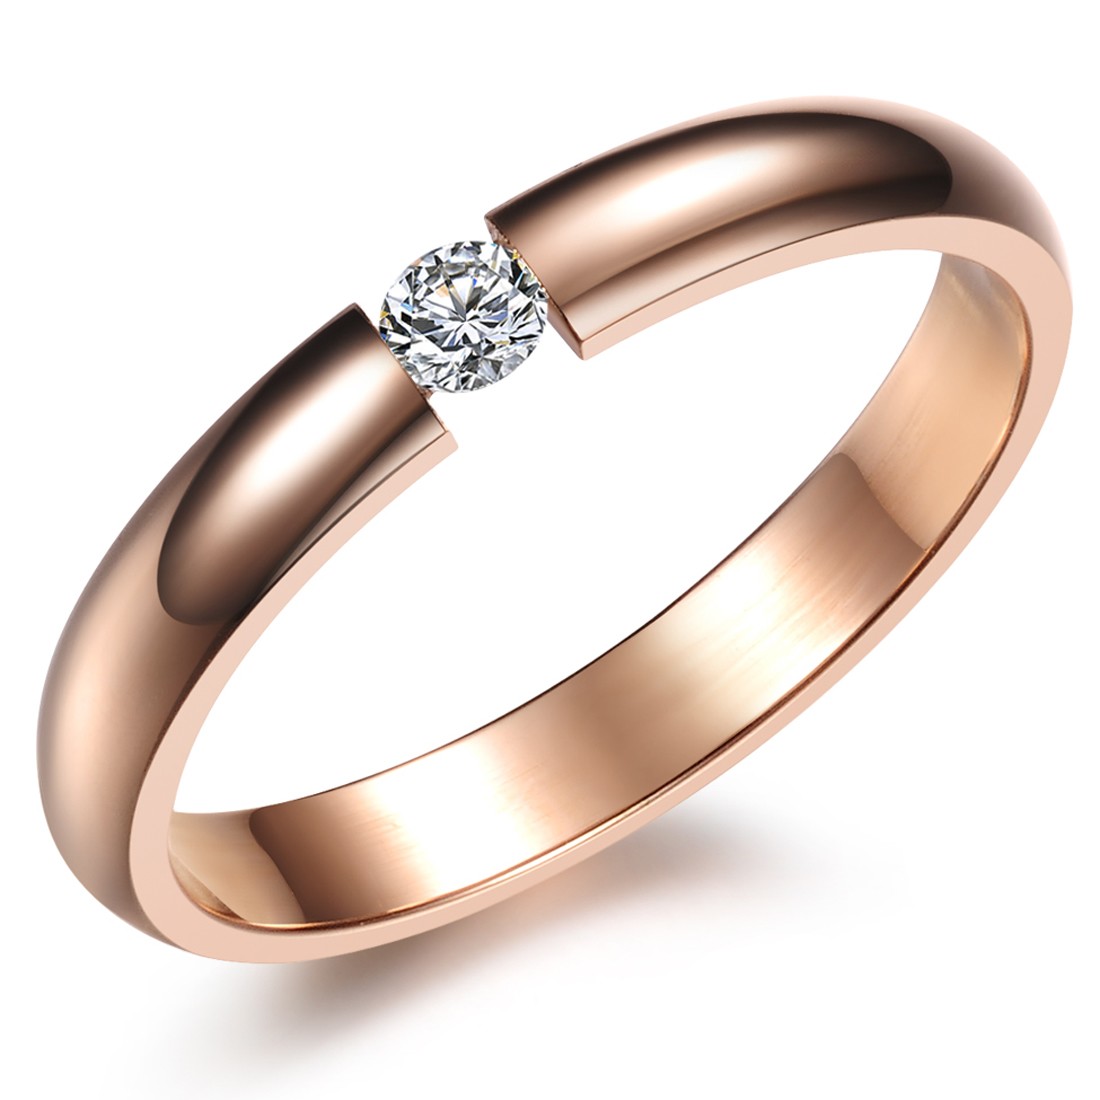 free shipping marriage ring Fashion friendship ring jewelry rose gold exquisite women s titanium ring gj373